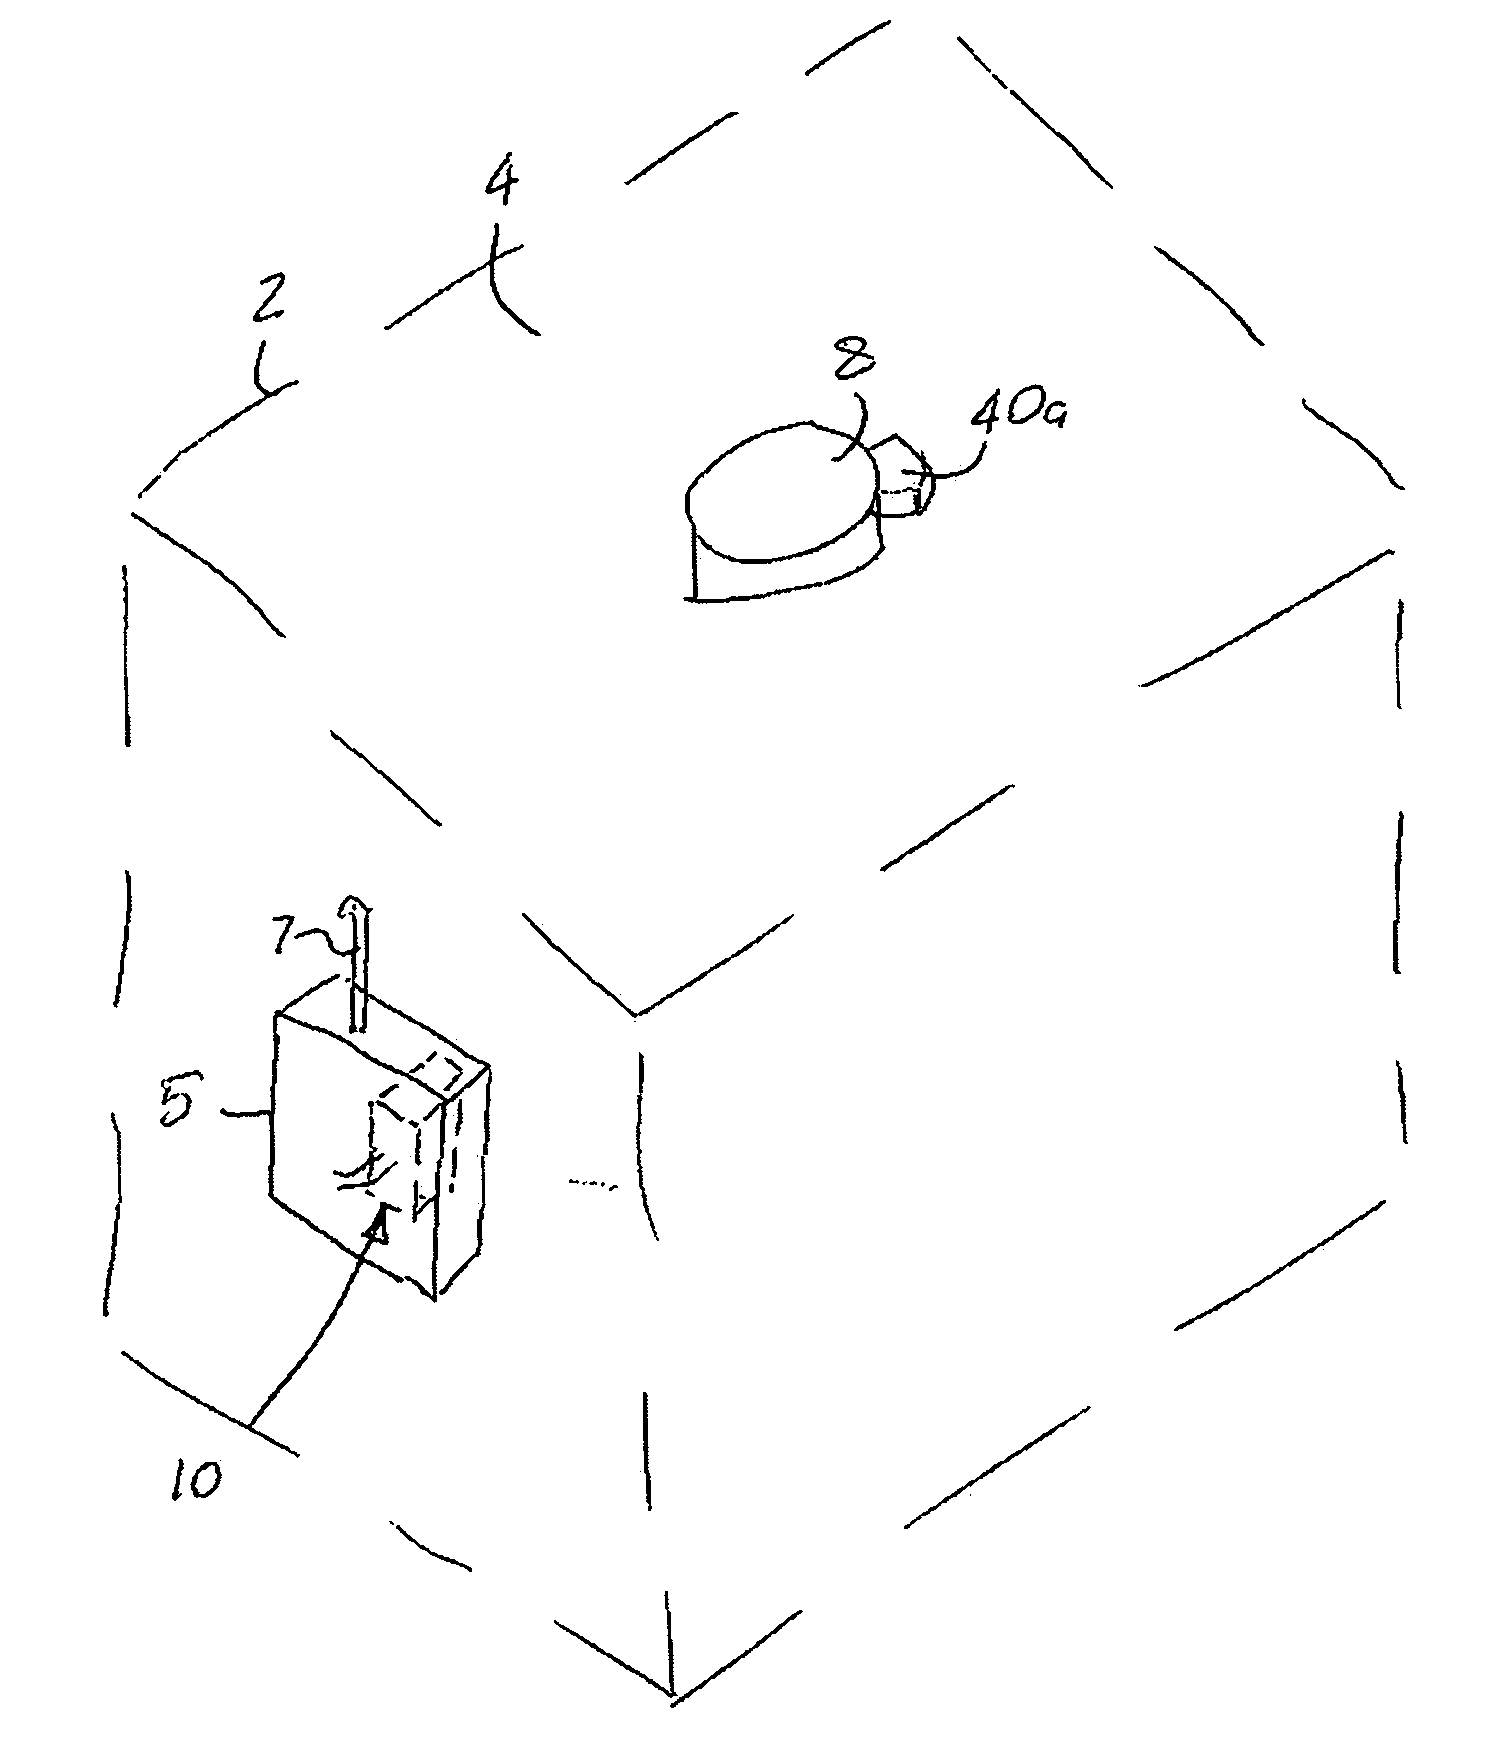 Automatic exhaust fan control apparatus and method